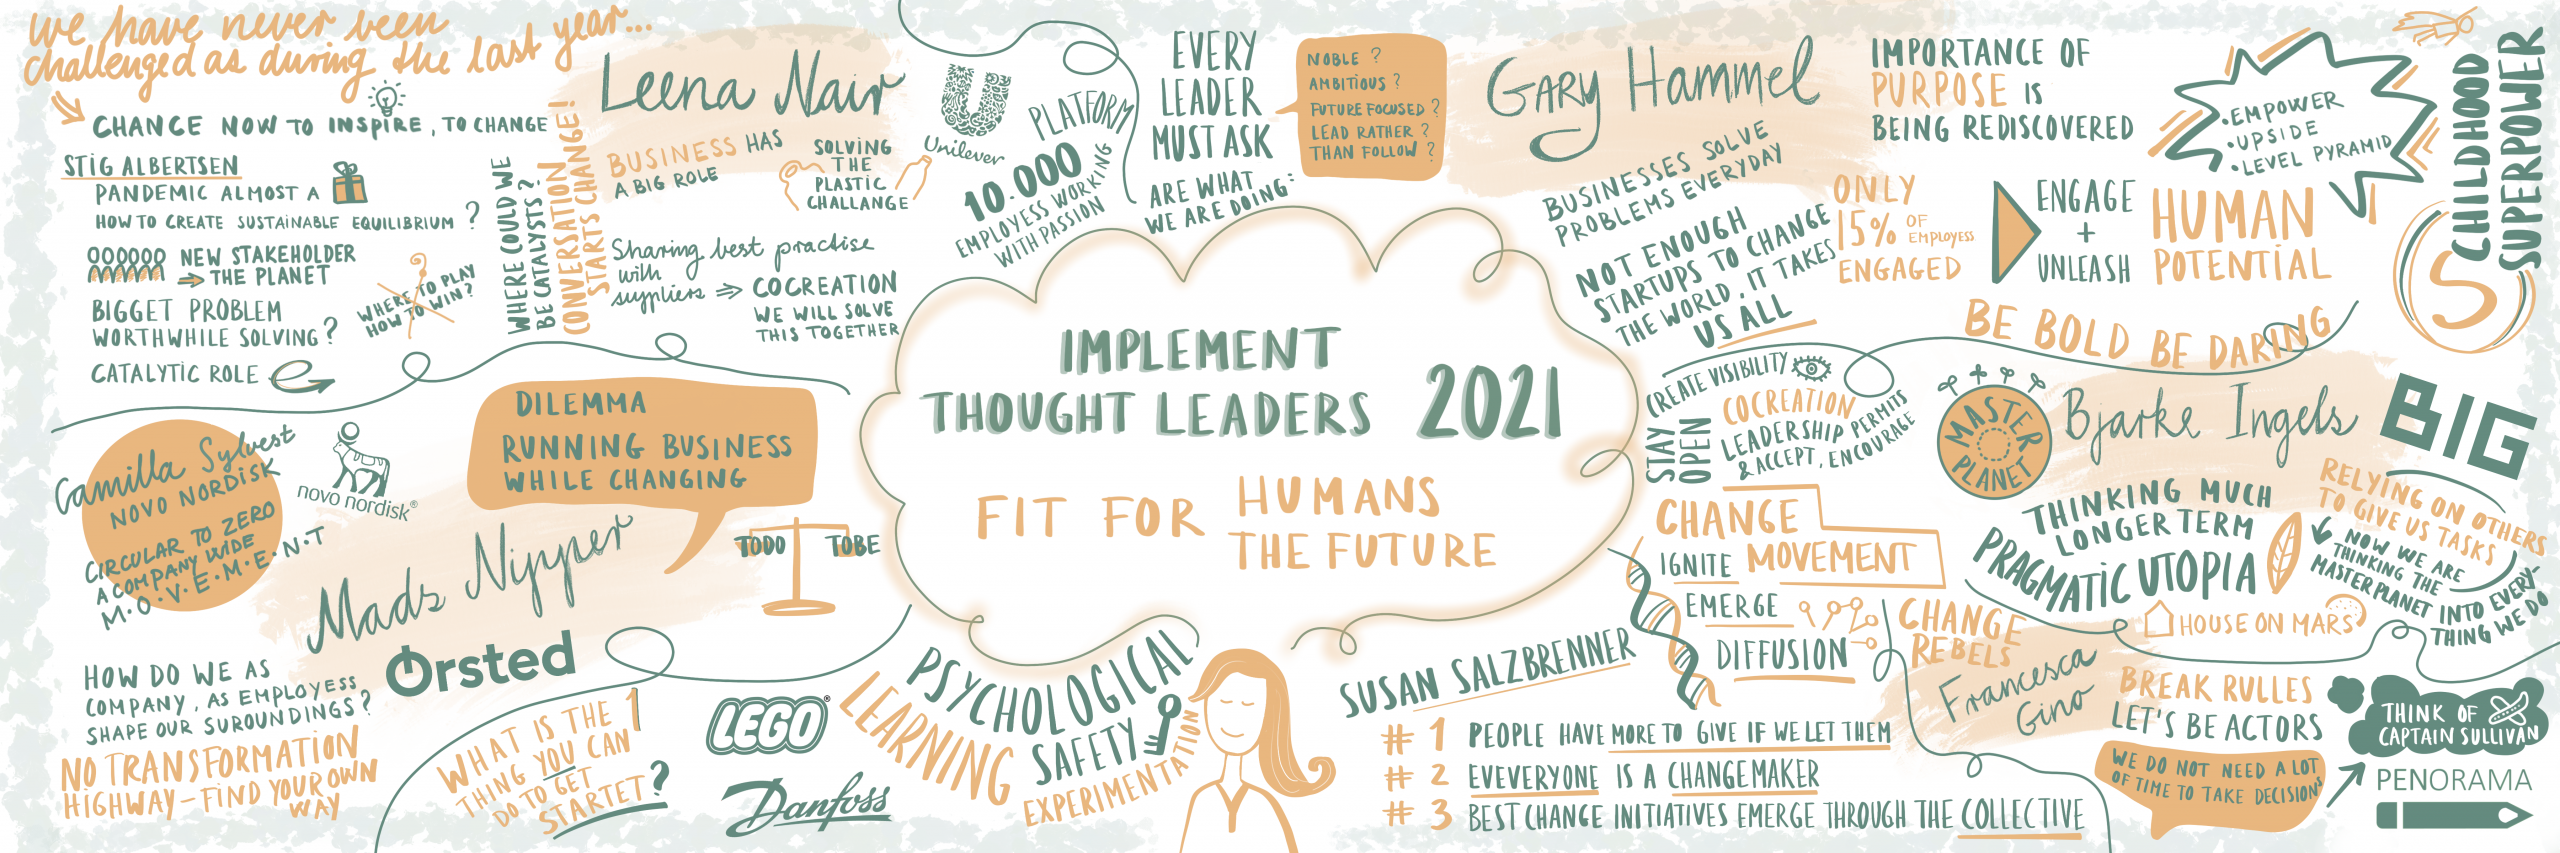 Graphic Recording: Implement Thought Leaders